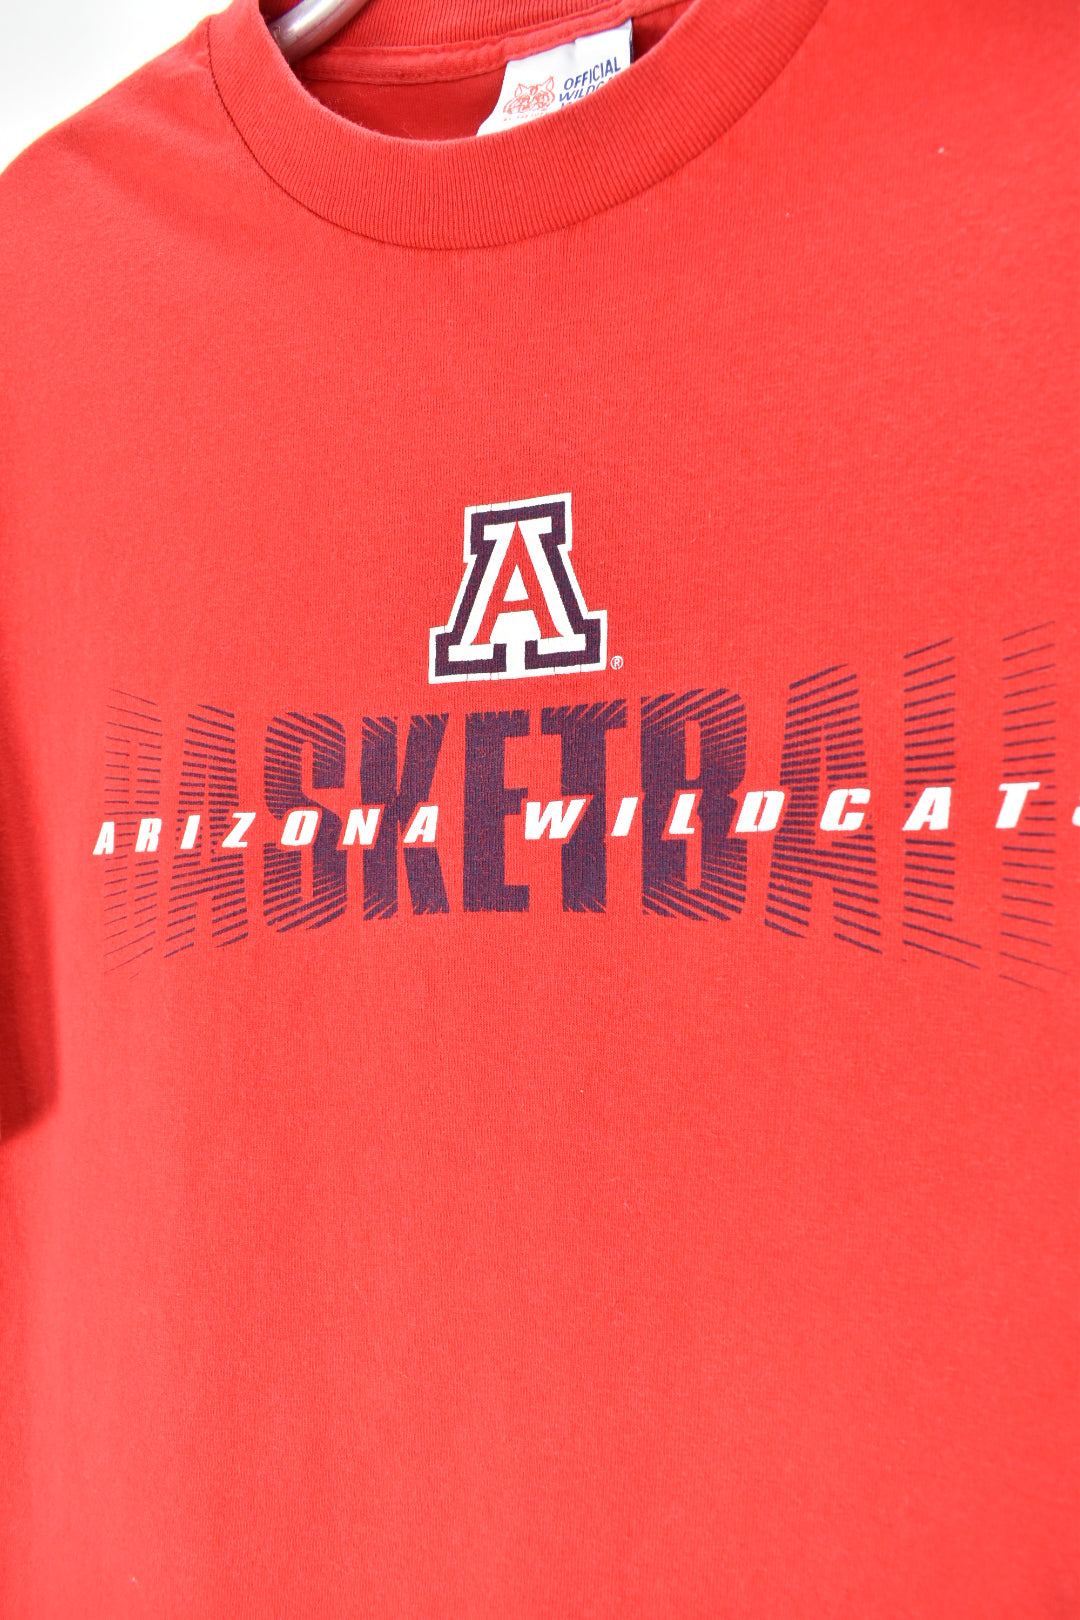 VINTAGE ARIZONA WILDCATS COLLEGE BASKETBALL RED T-SHIRT | LARGE COLLEGE